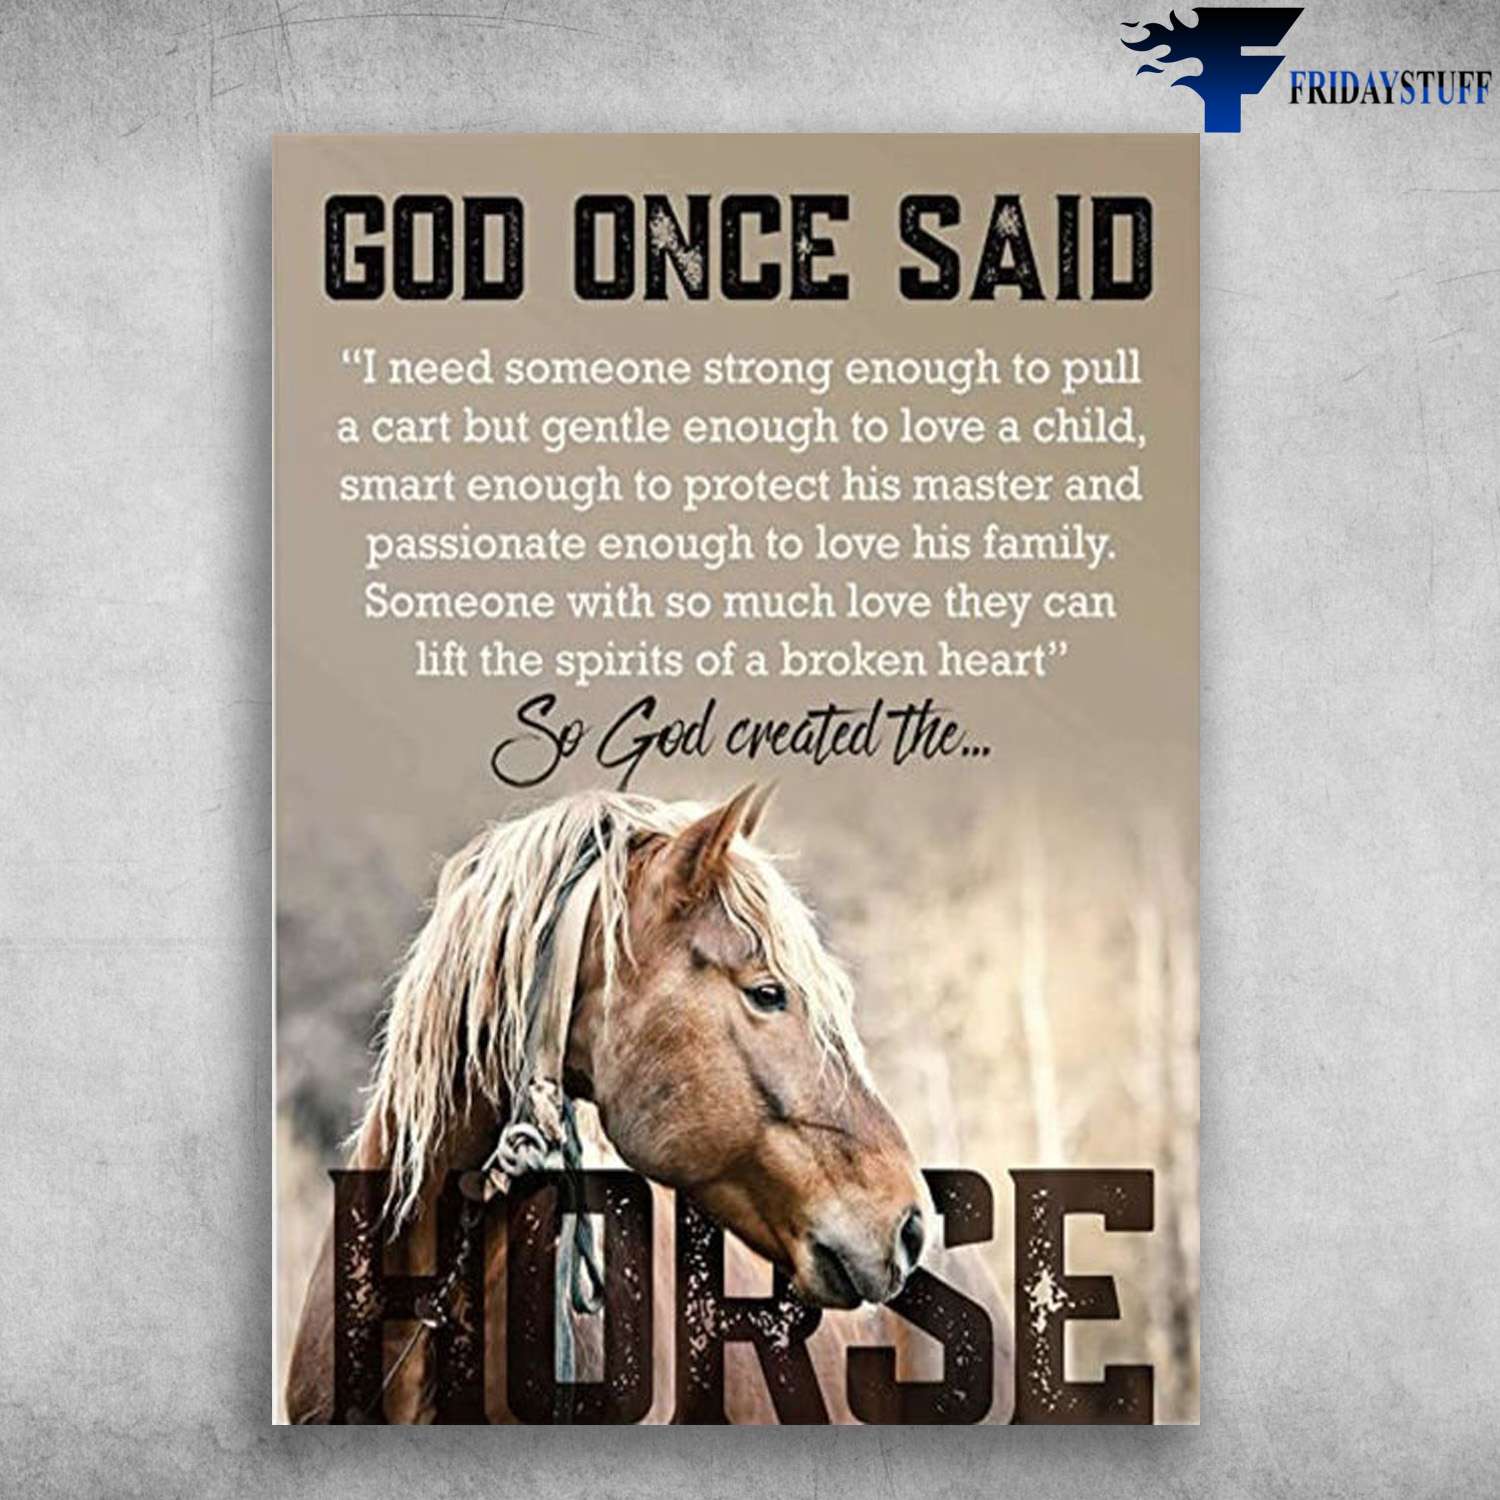 Horse Poster - God Once Said, I Need Someone Strong Enough, To Pull A Cart But Gentle Enough To Love A Child, Smart Enough To Protect His Master, And Passionate Enough To Love His Family